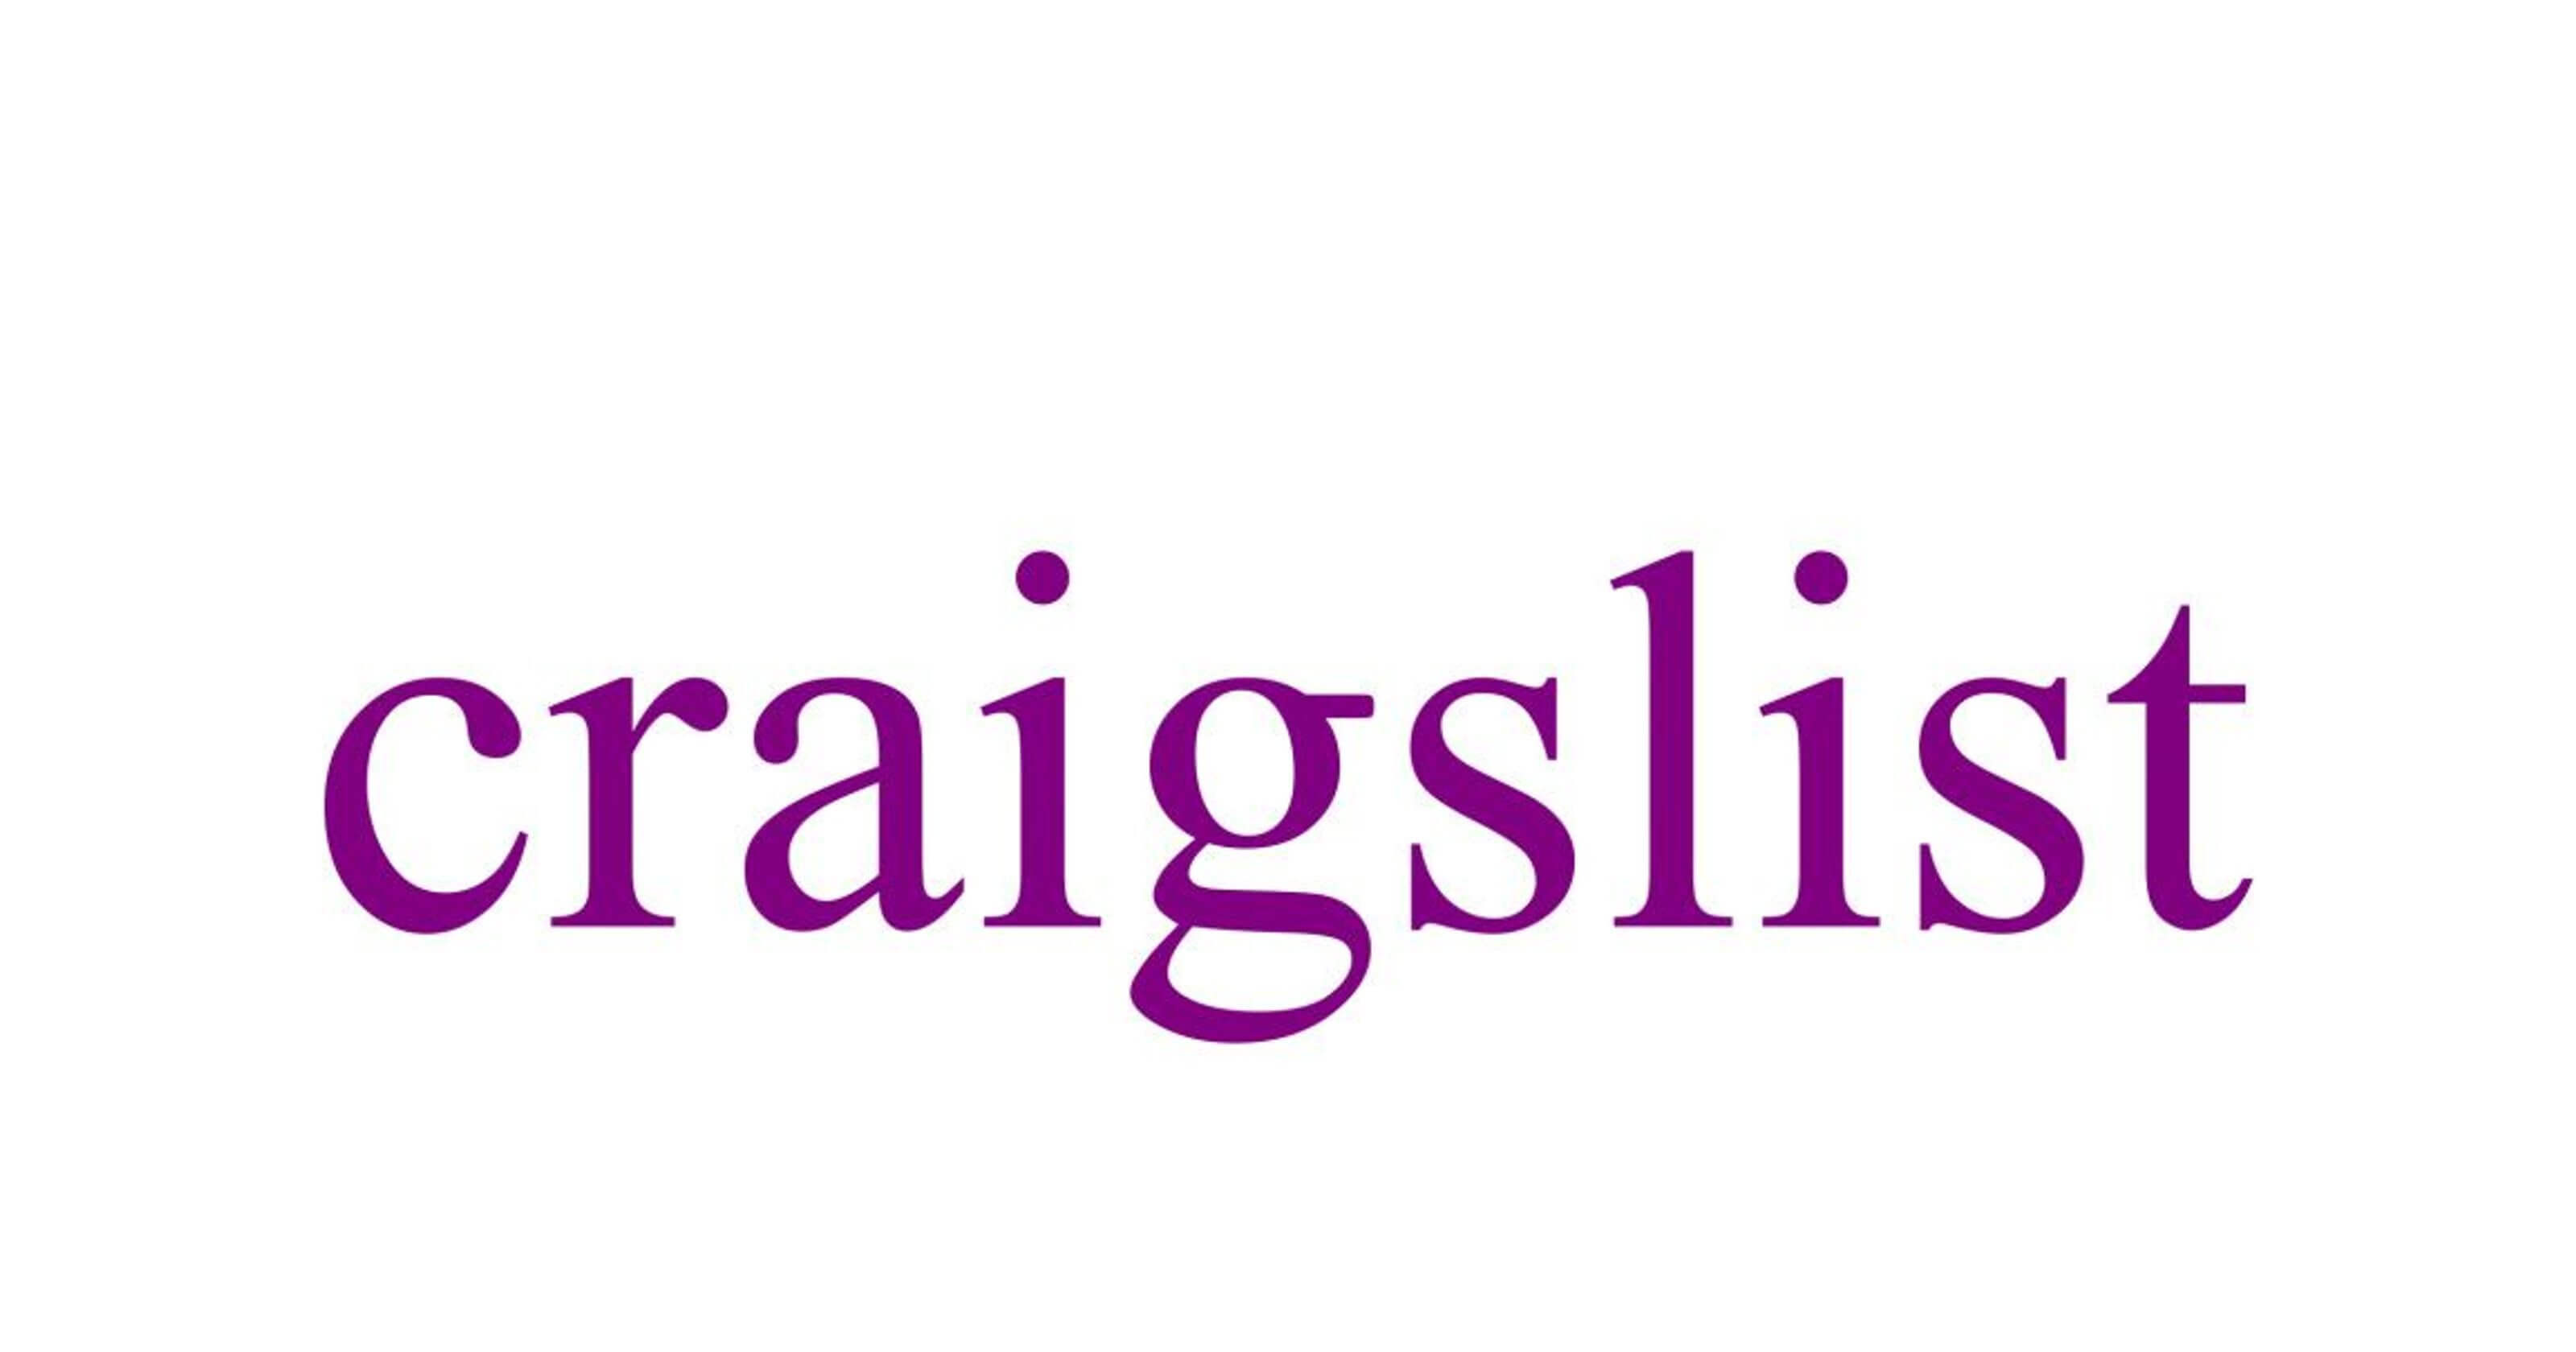 Craiglist job posting, How to post a job on Craiglist, Craiglist job board, Craiglist ATS, Craiglist for employers, Craiglist recruiter, how to hire, what is Craiglist, post job free